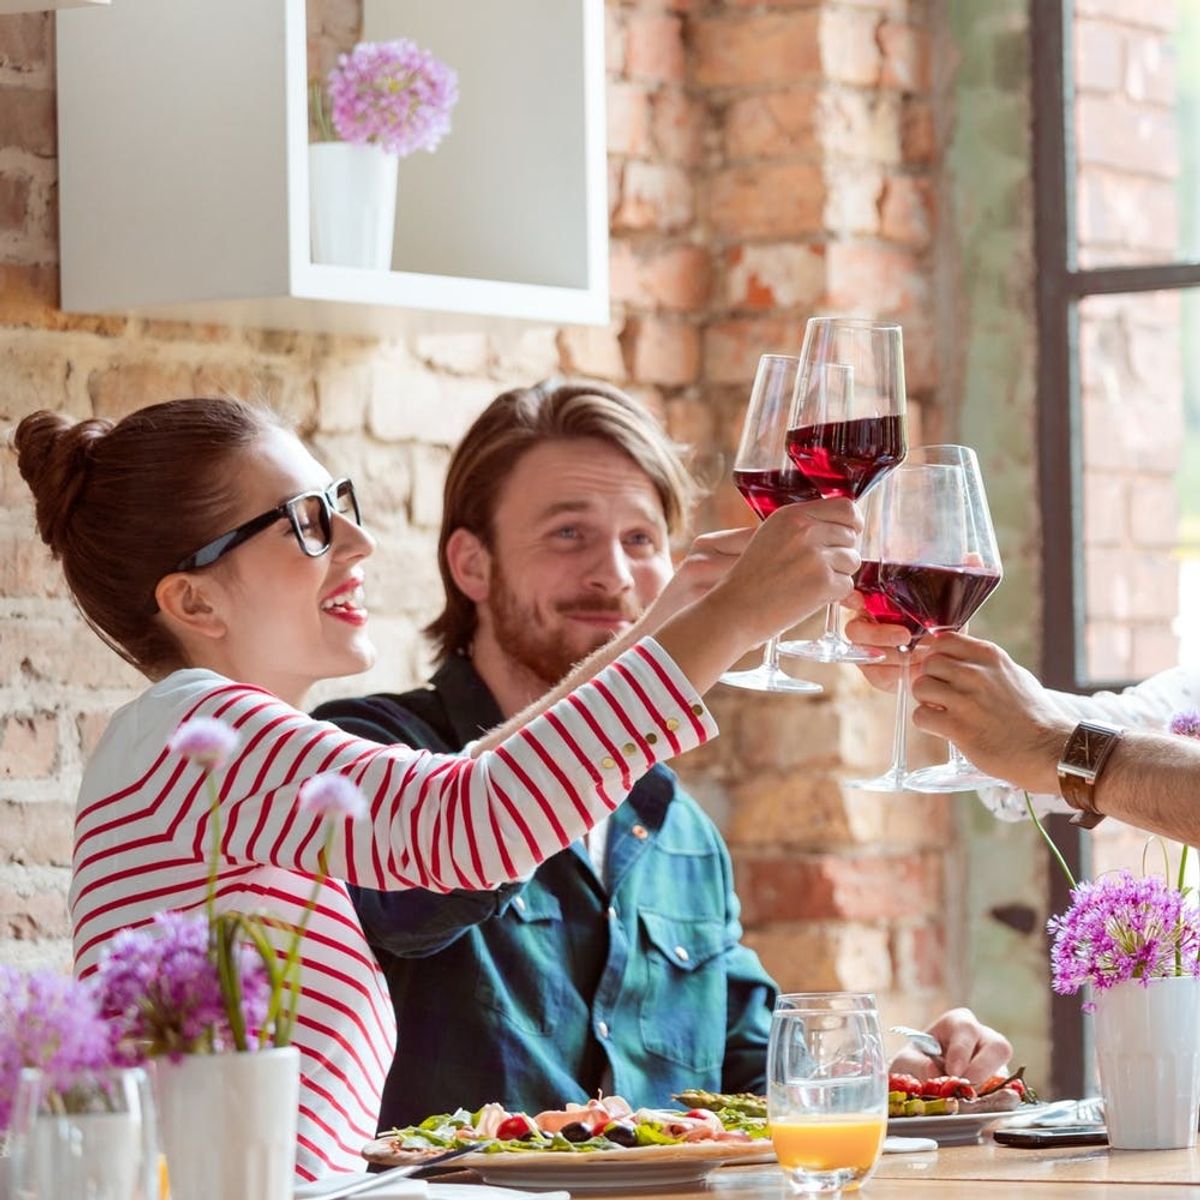 4 No-Fail Expert Tips to Doing Happy Hour on a Diet